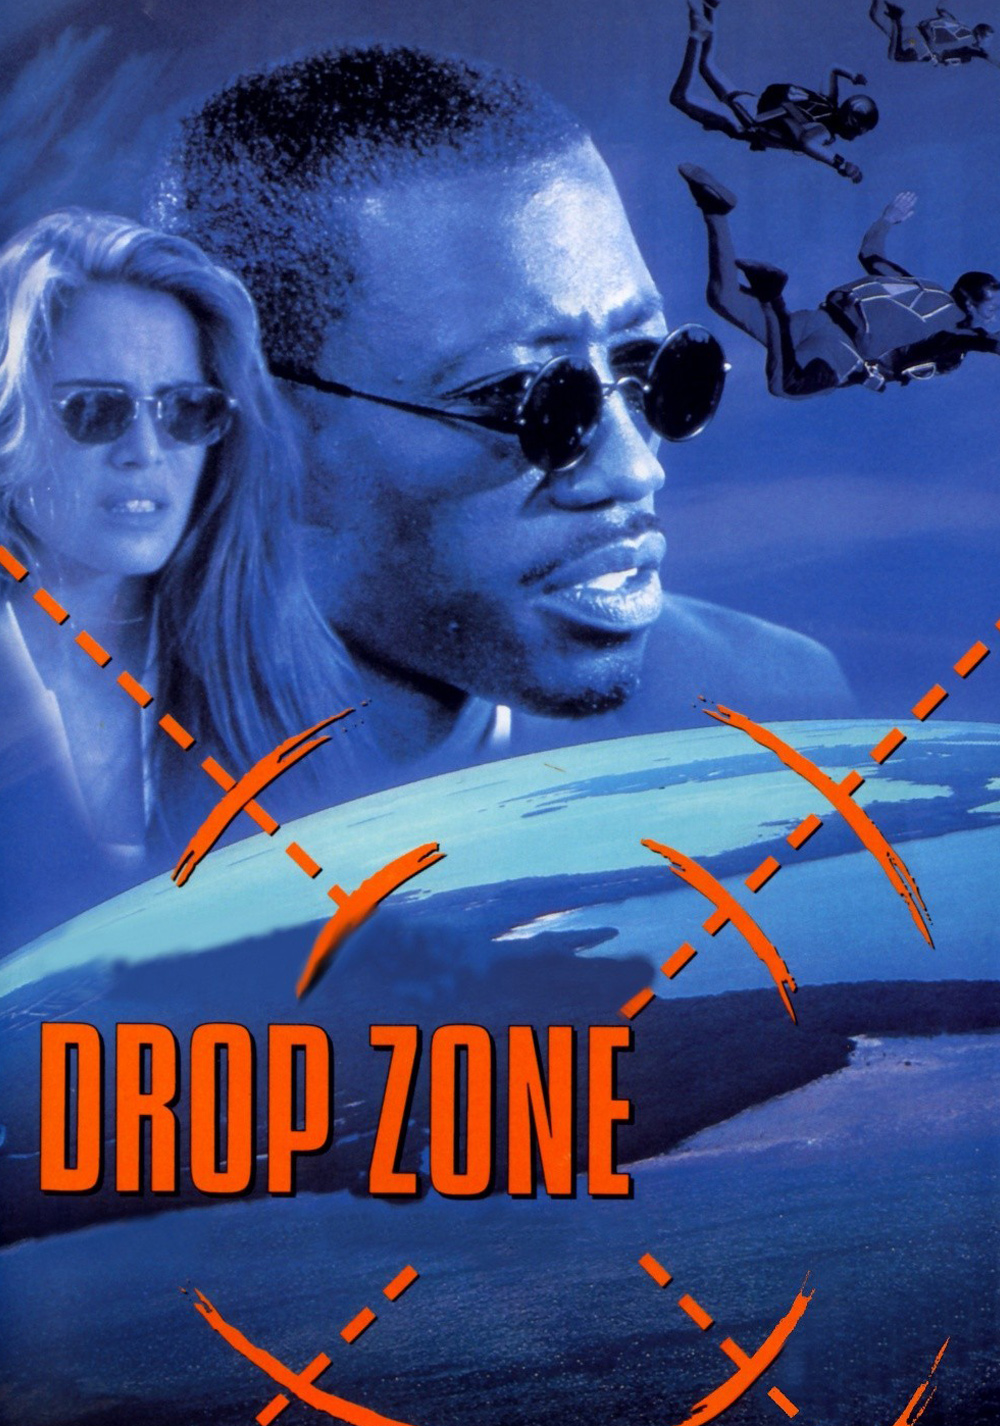 Dropzone 4 instaling